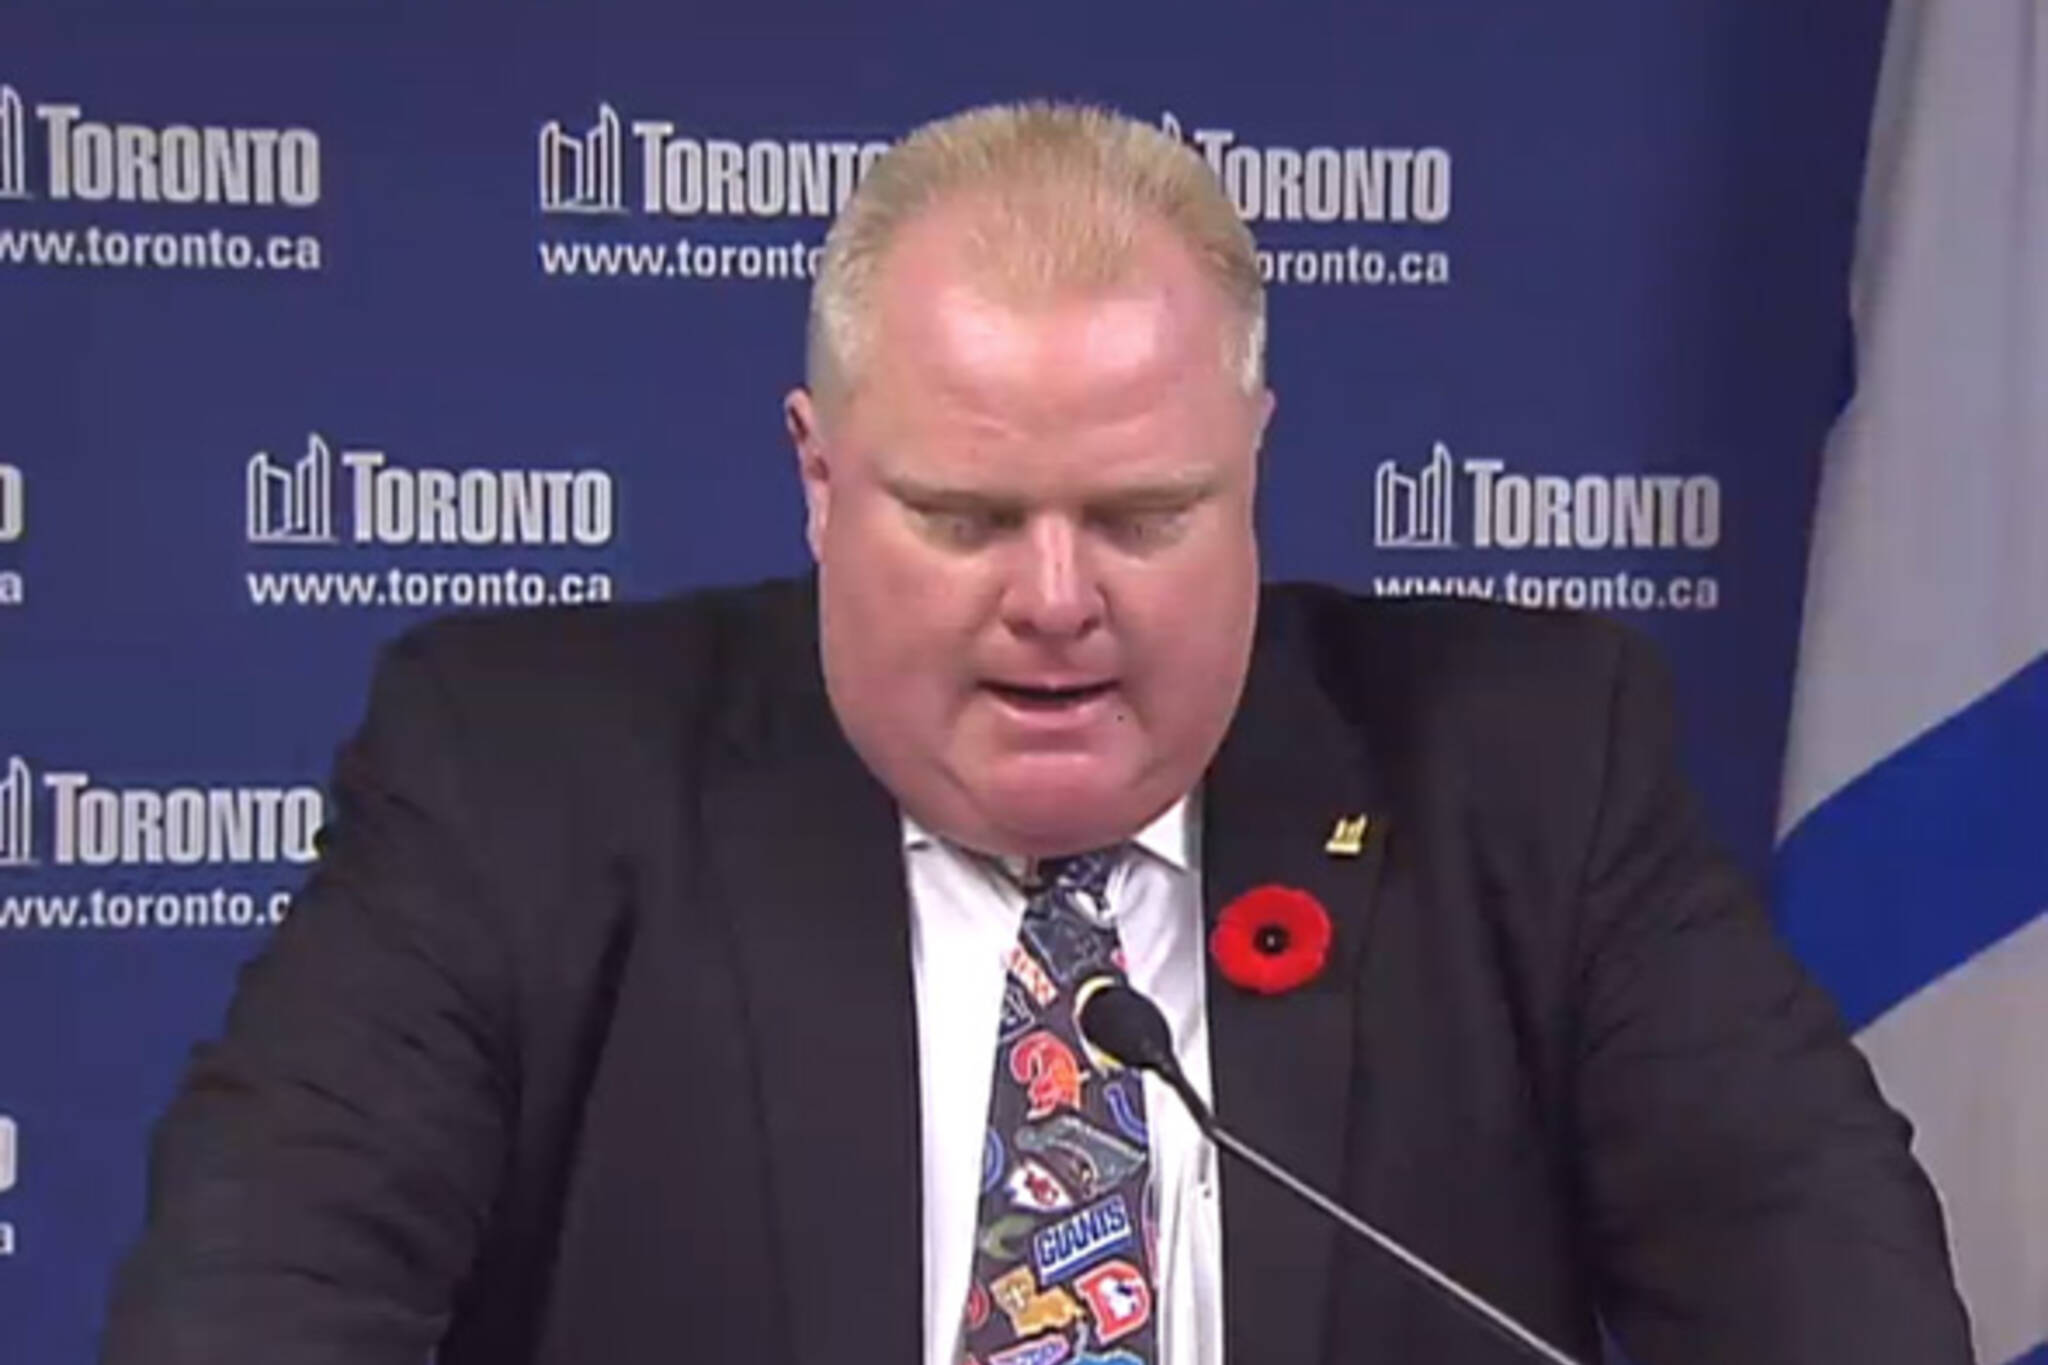 Rob Ford Policy Advisor resign